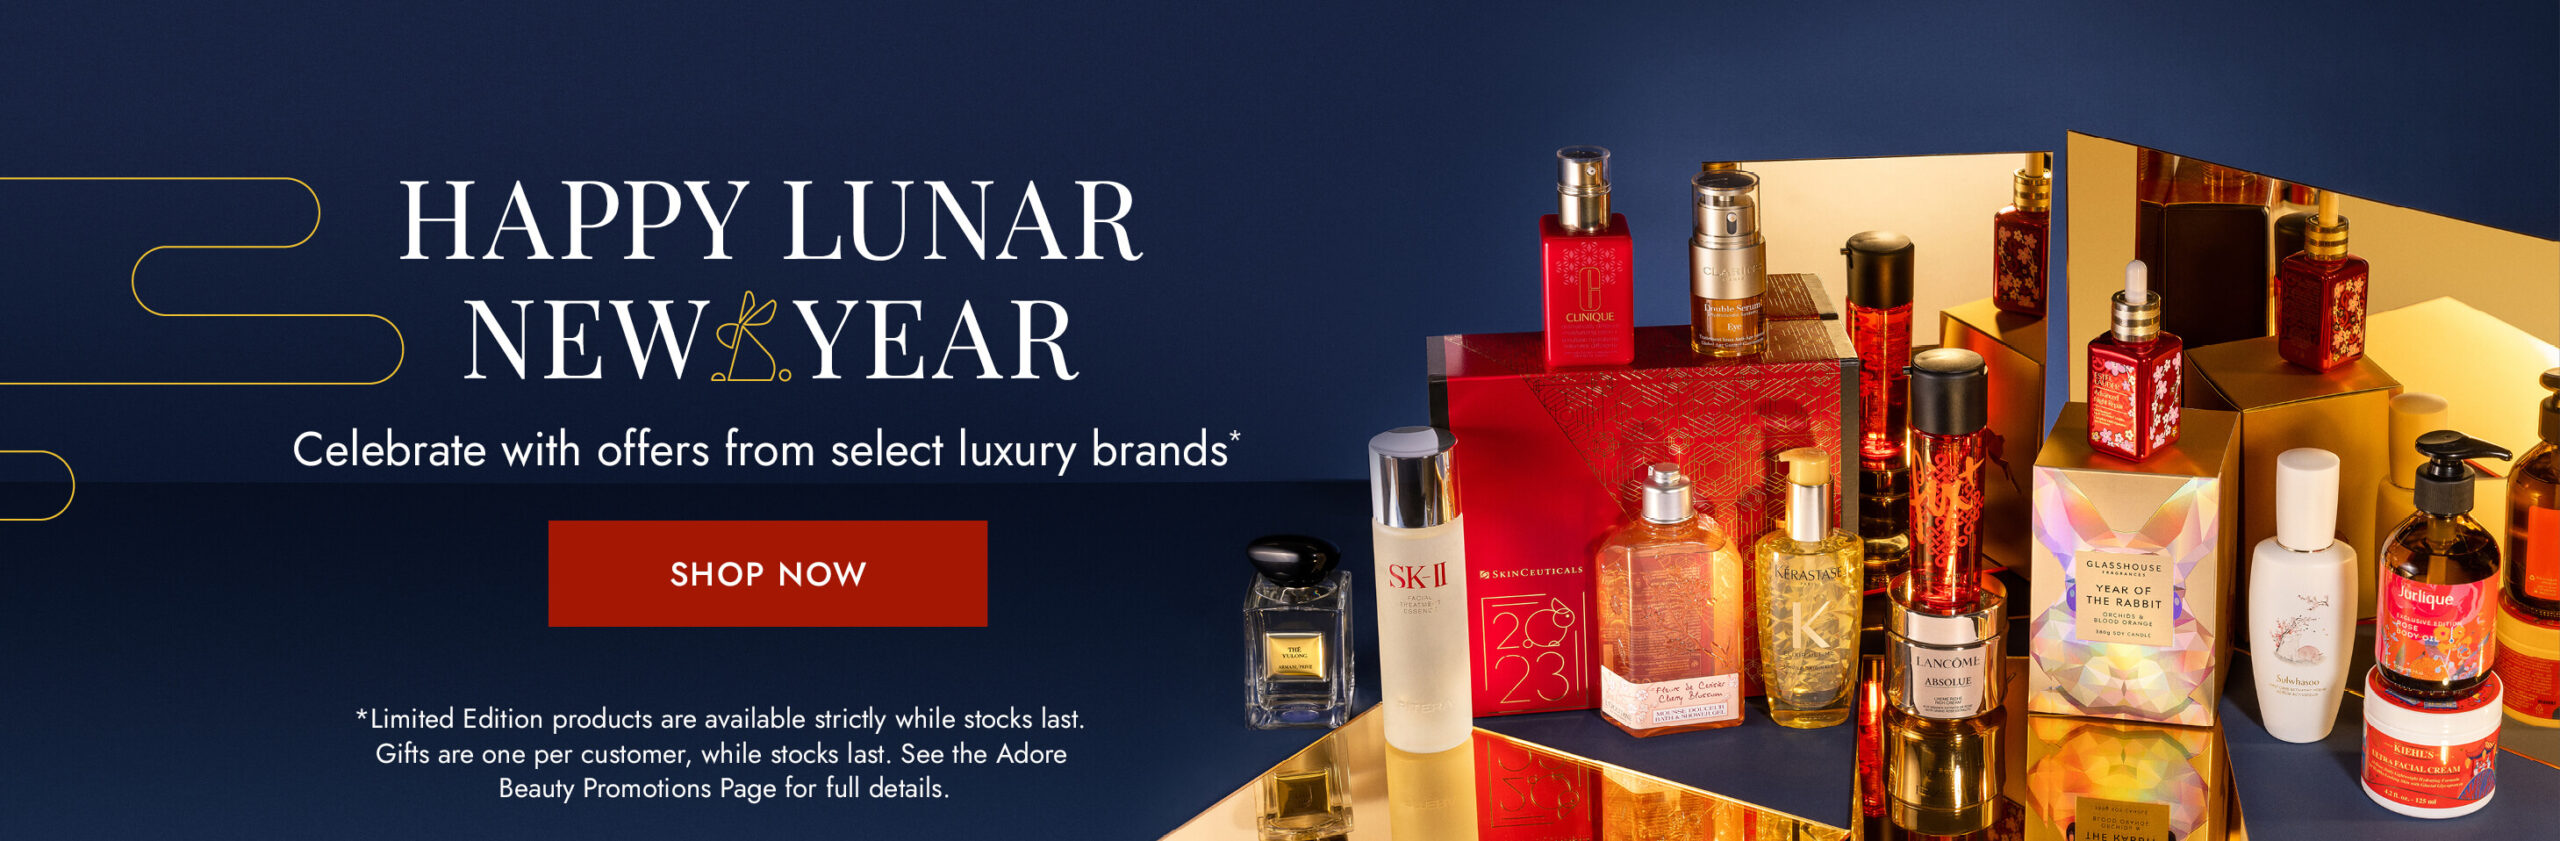 Adore Beauty - New Year Offer